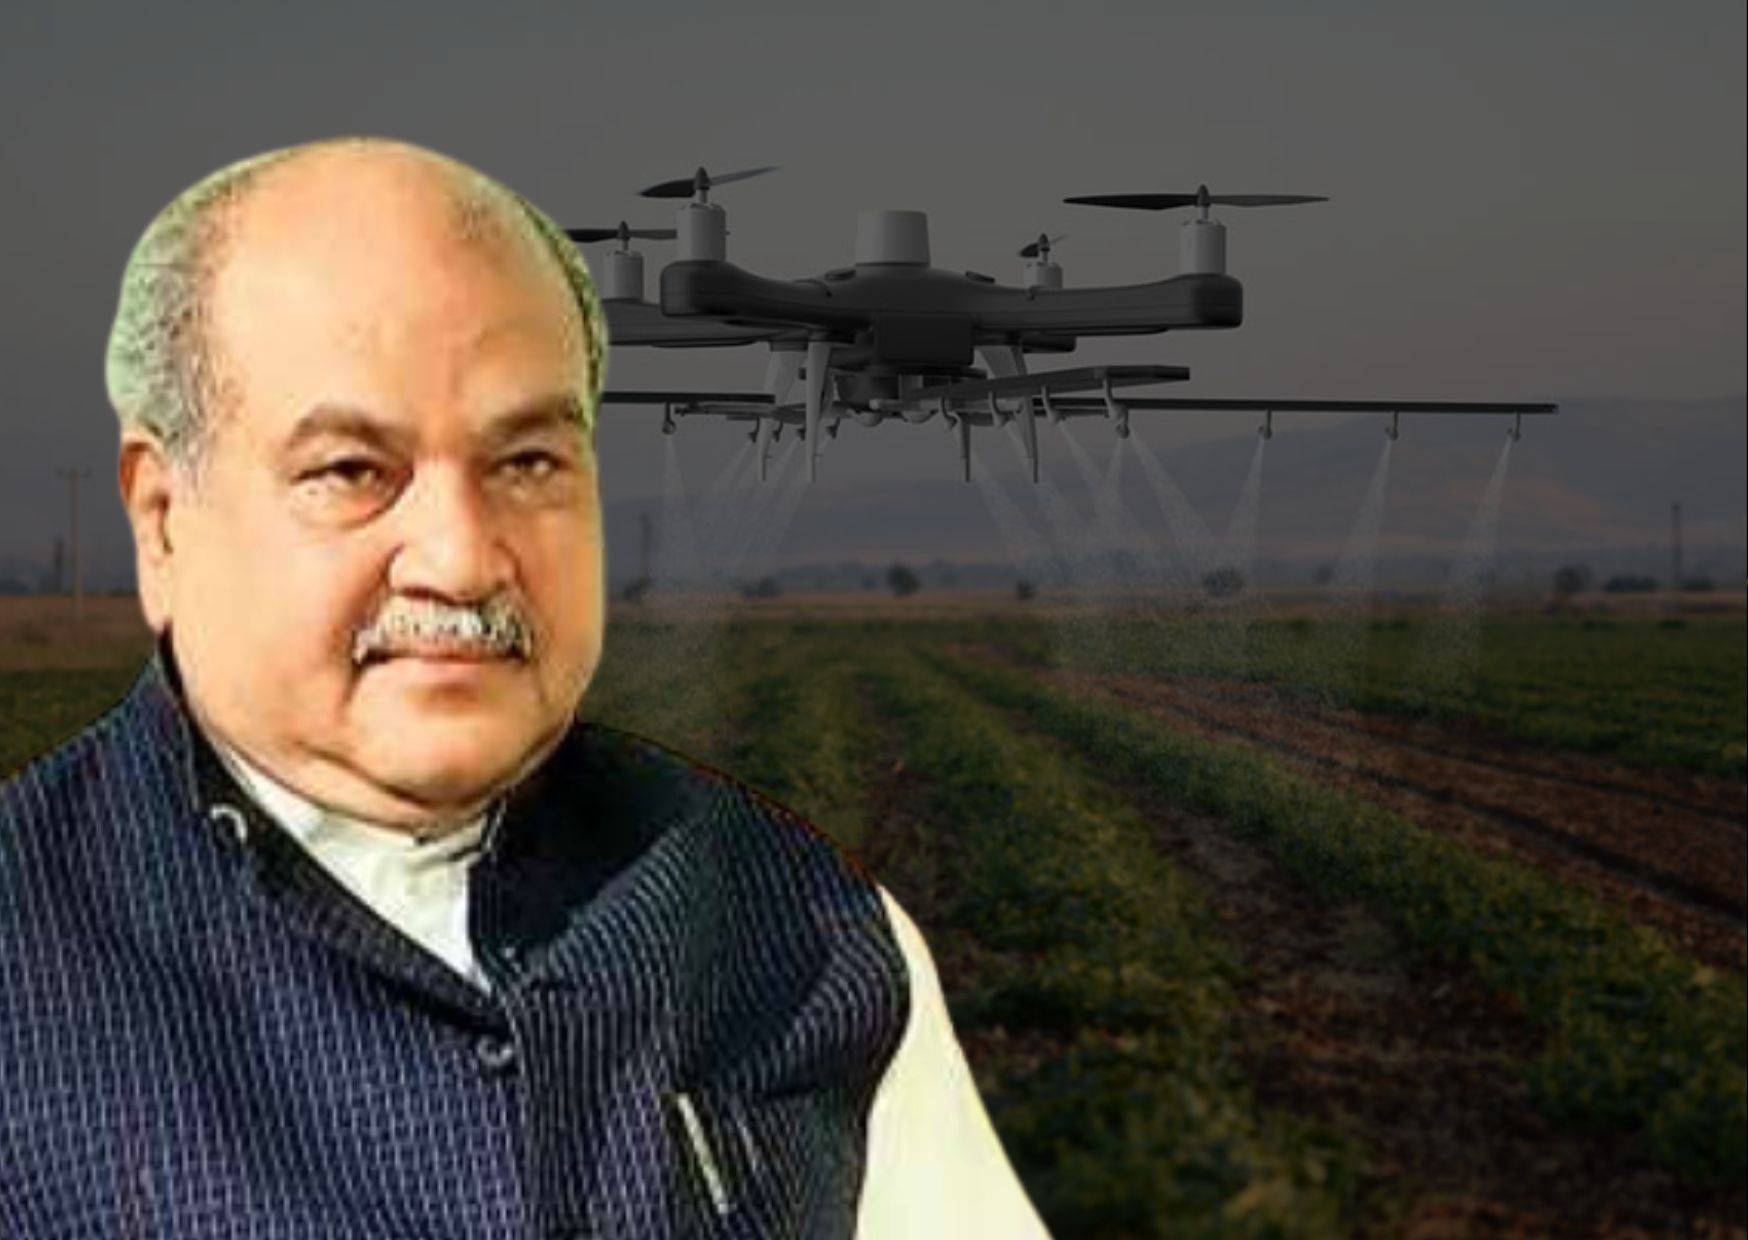 Indian government assessing crops digitally, says Agriculture Minister Tomar